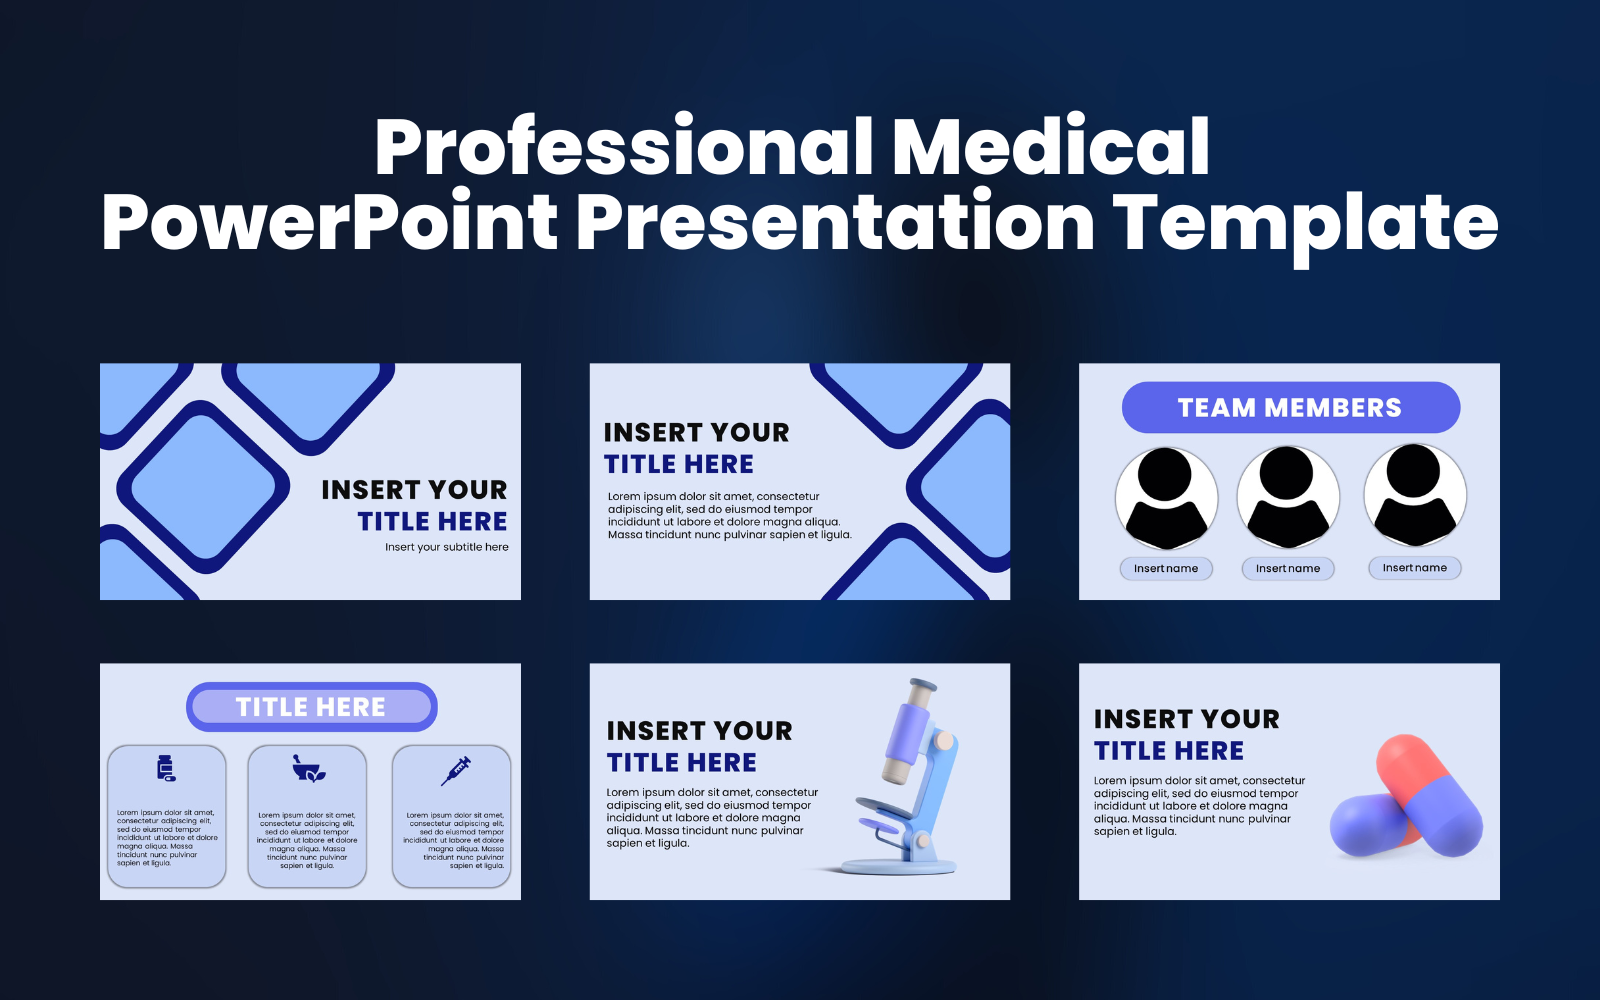 Professional Medical PowerPoint Presentation Template